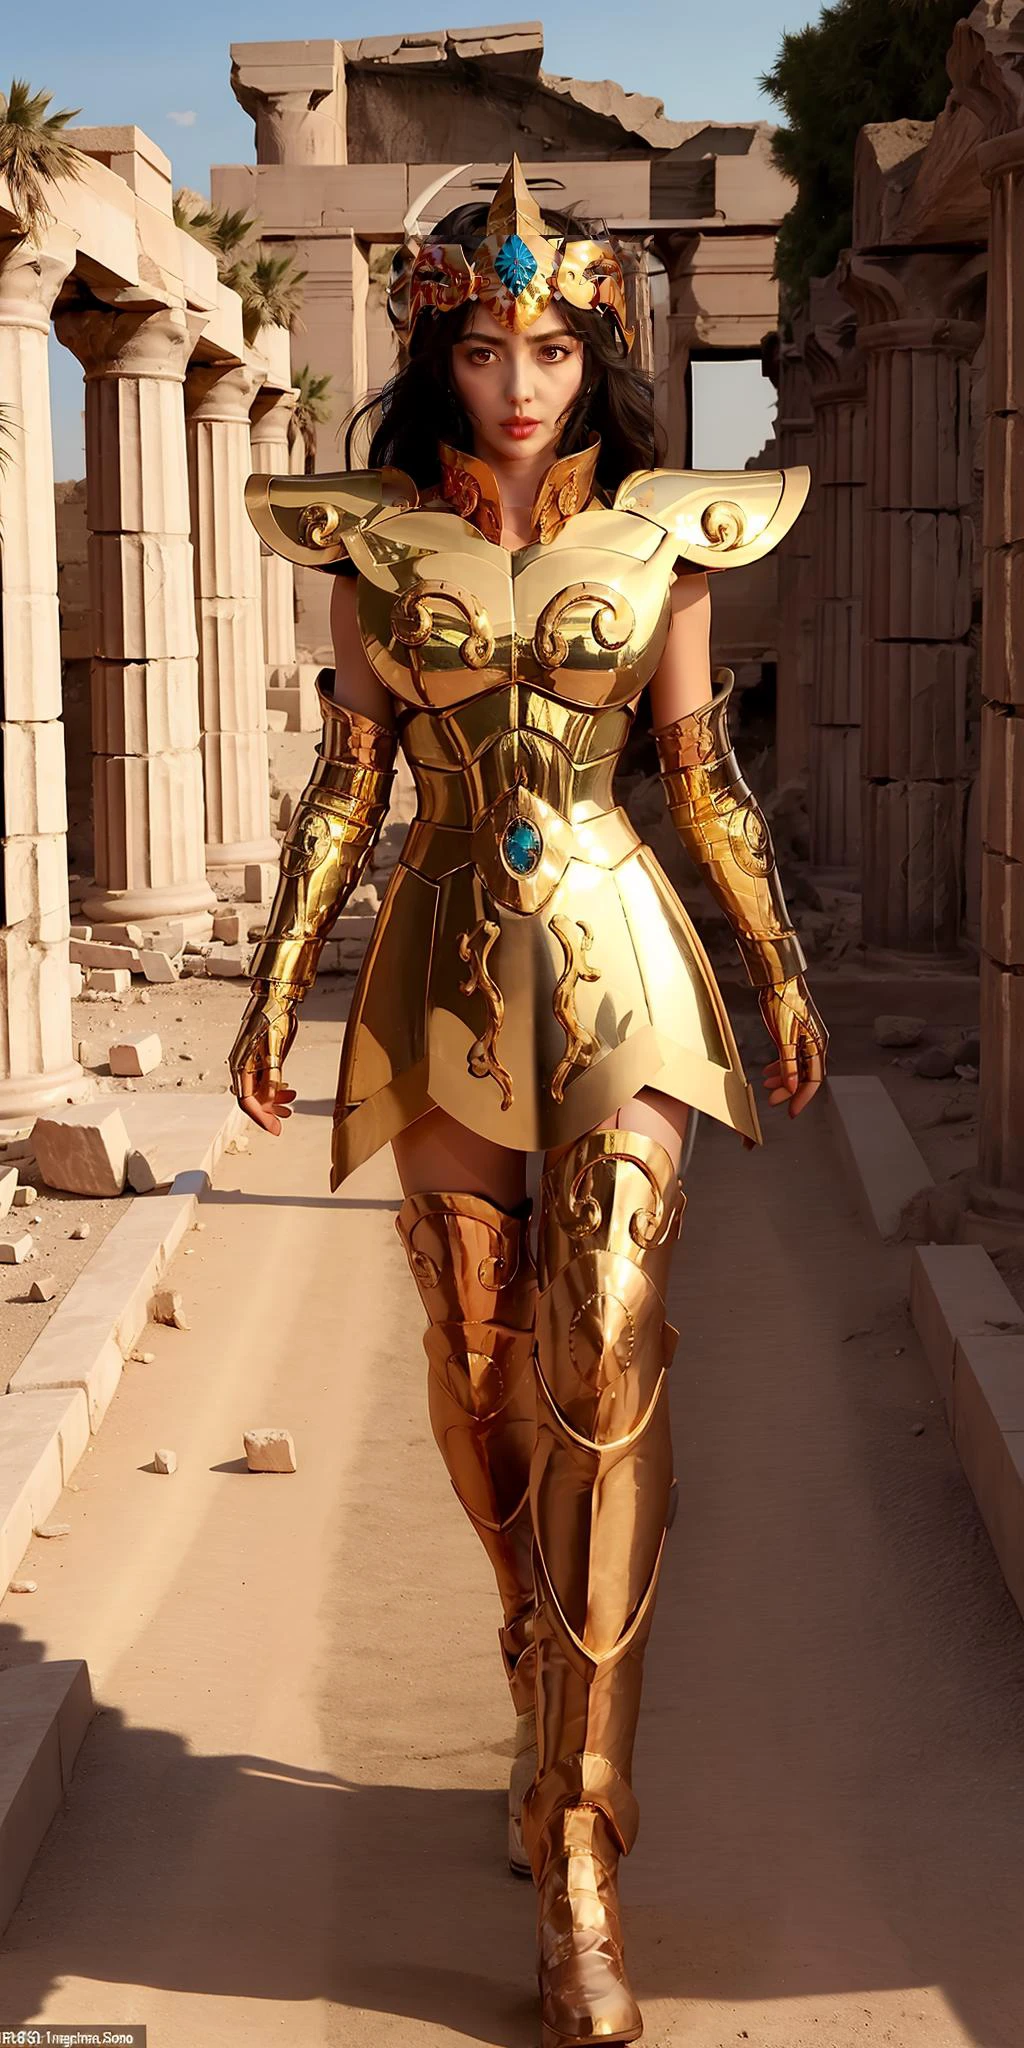 masterpiece,best quality,full body,1girl wearing Armor,(tongly),leoarmor,golden armor,helmet,looking at viewer,in a desert,black hair,hair hair pulled back,no bangs,forehead,serious,parted lips,greek temple ruins in the desert,(wide shot),upper upper teeth,